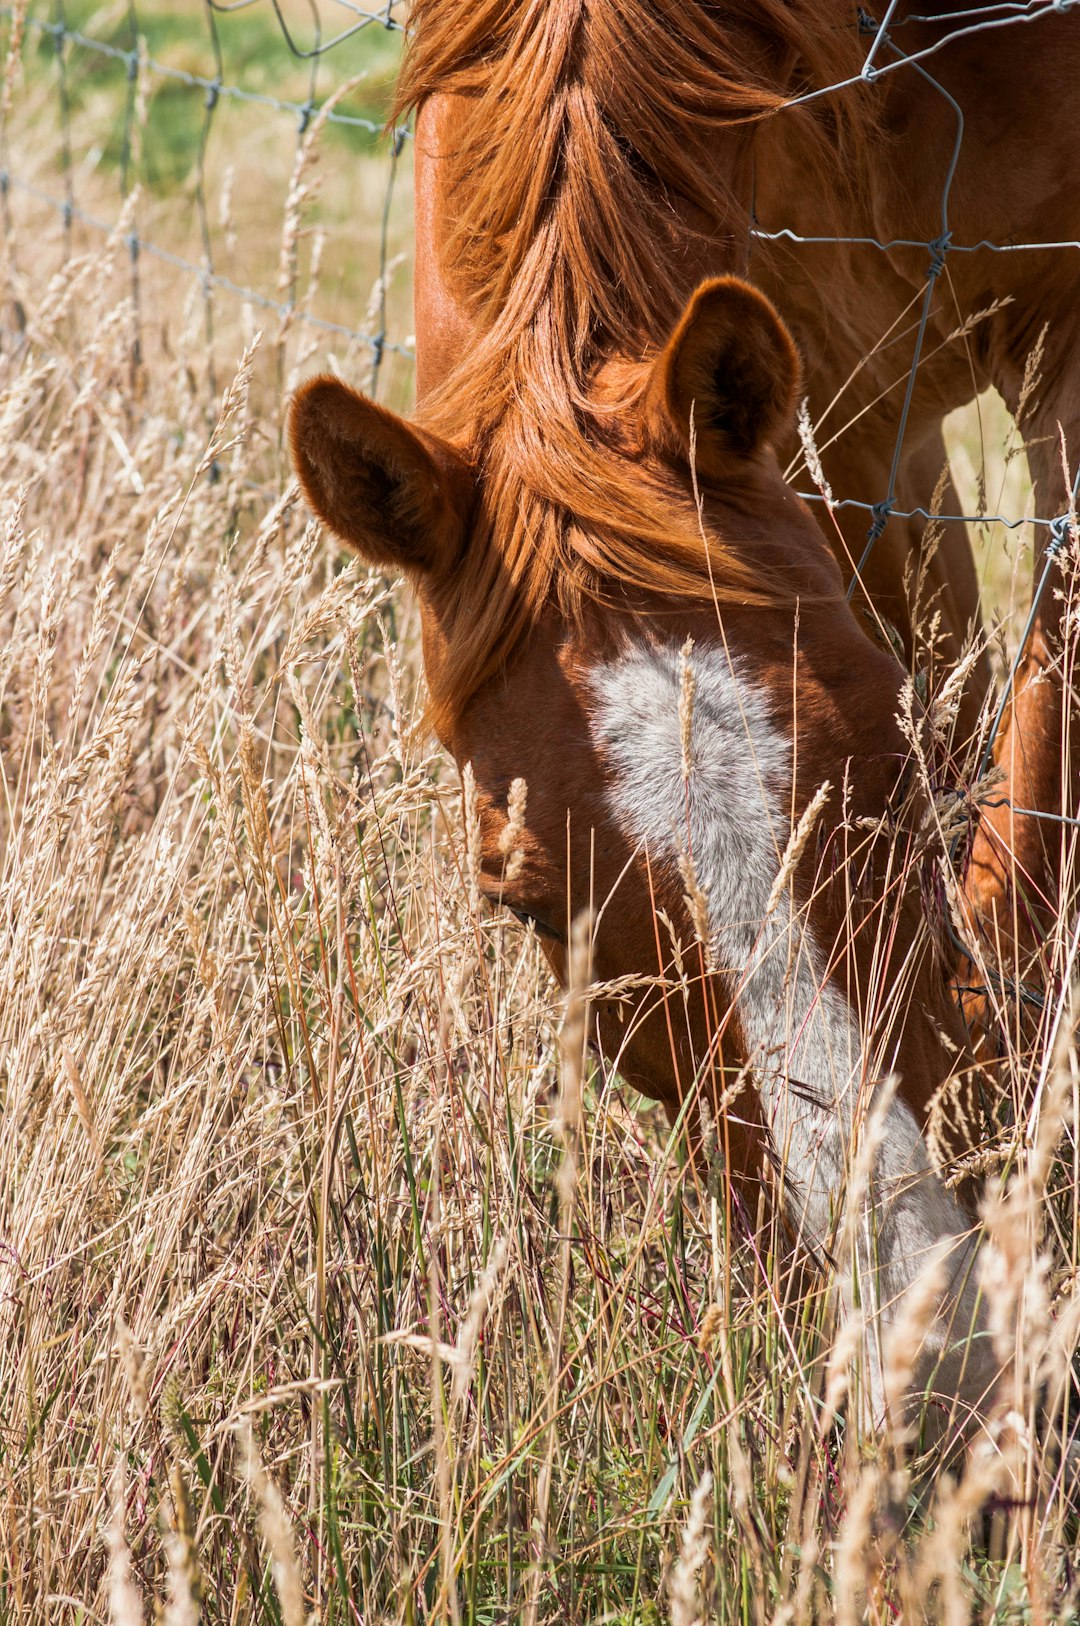 brown and white horse on brown grass field during daytime